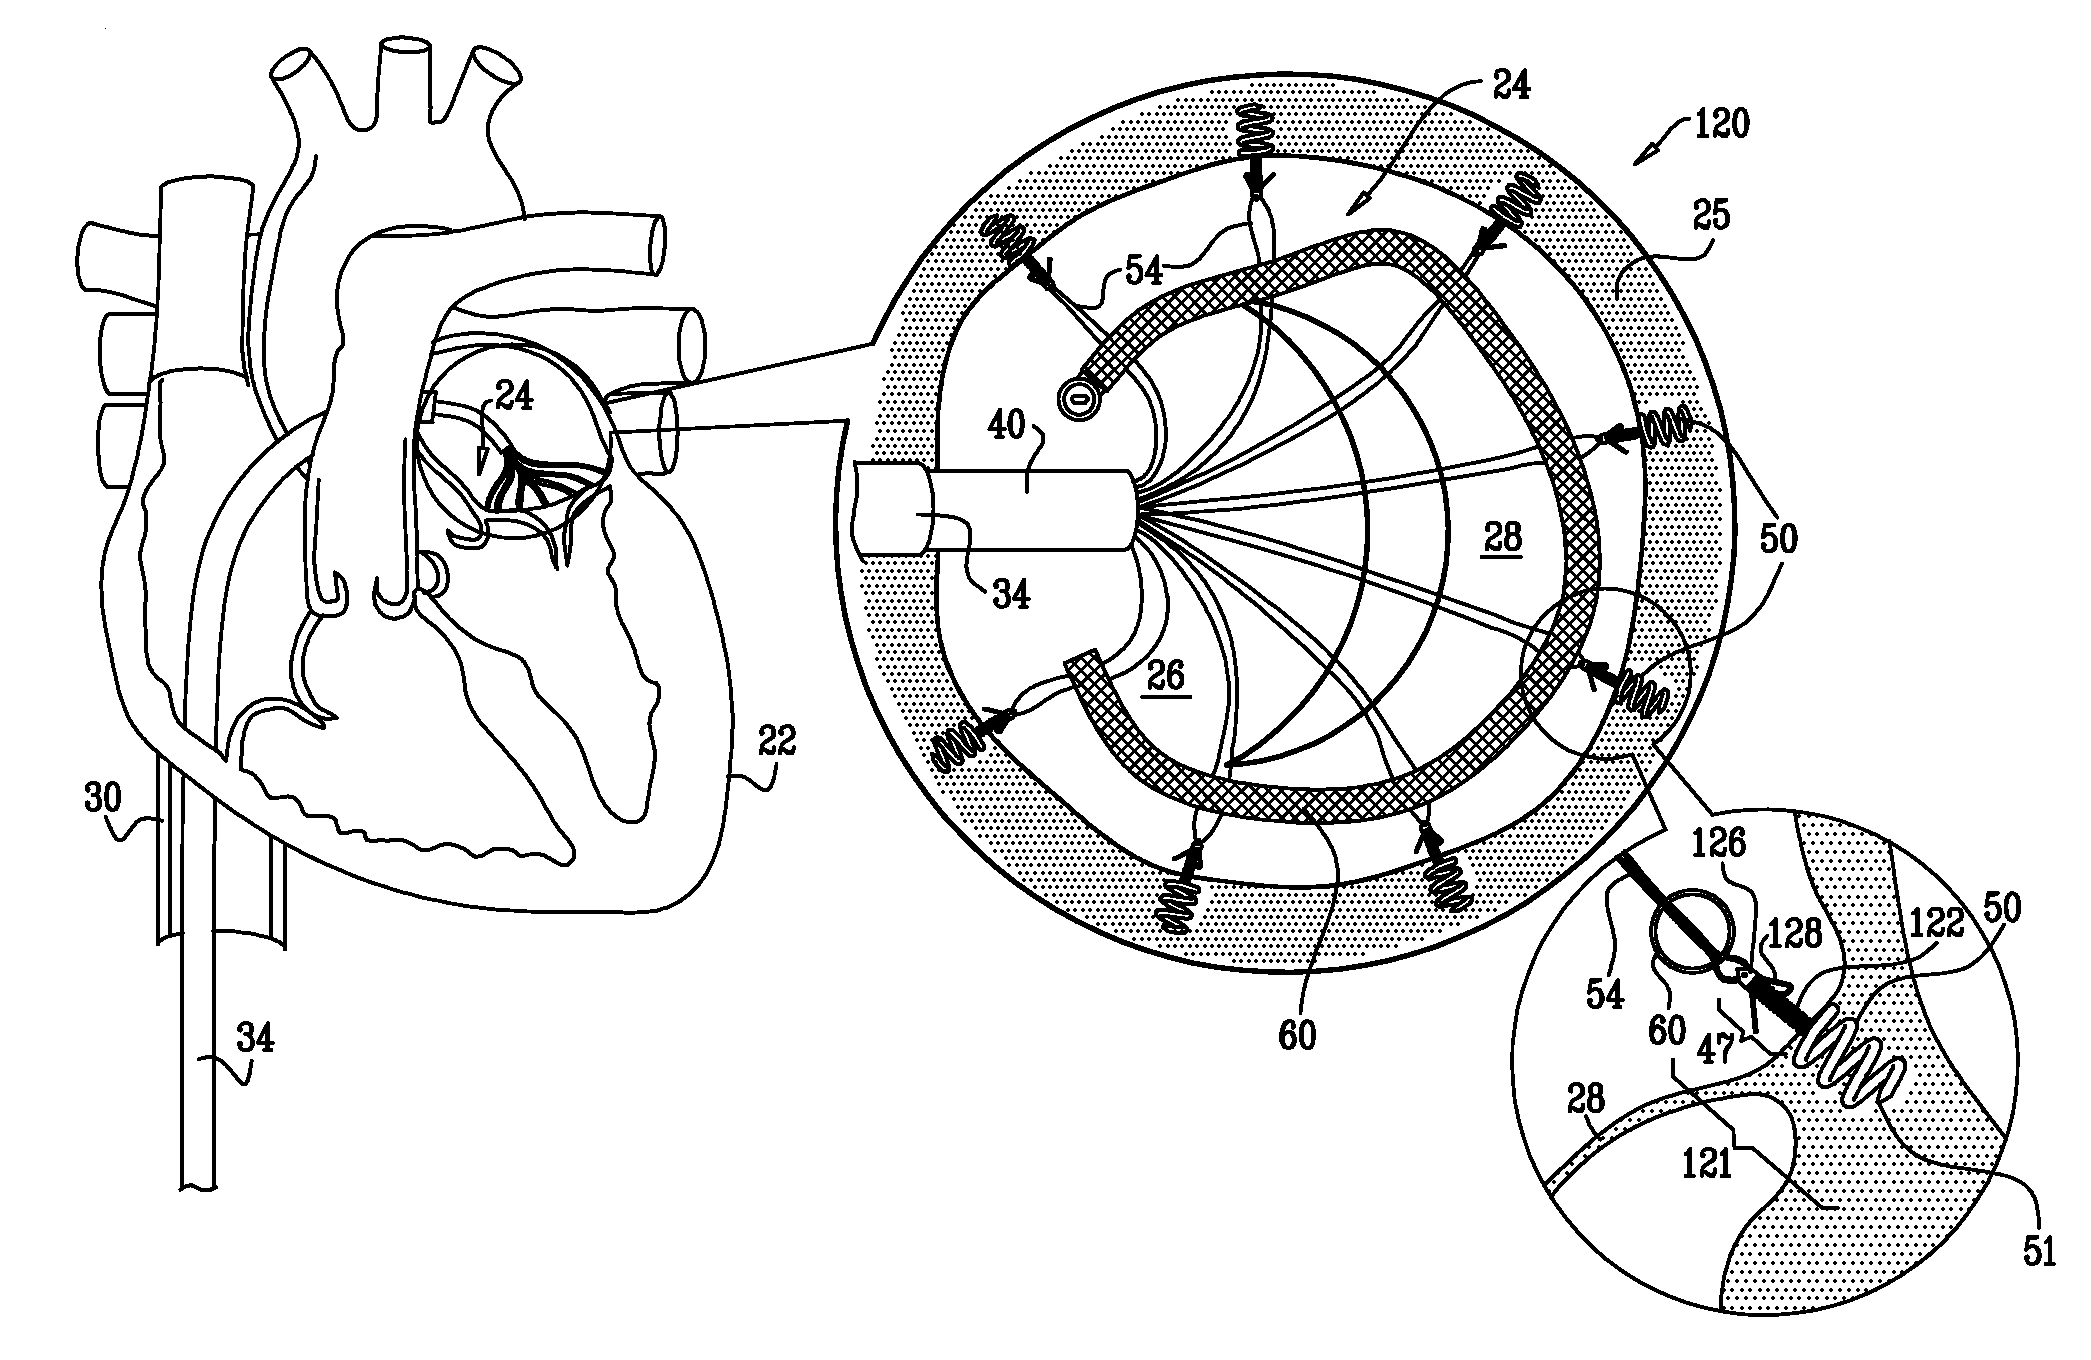 Tissue anchor for annuloplasty device